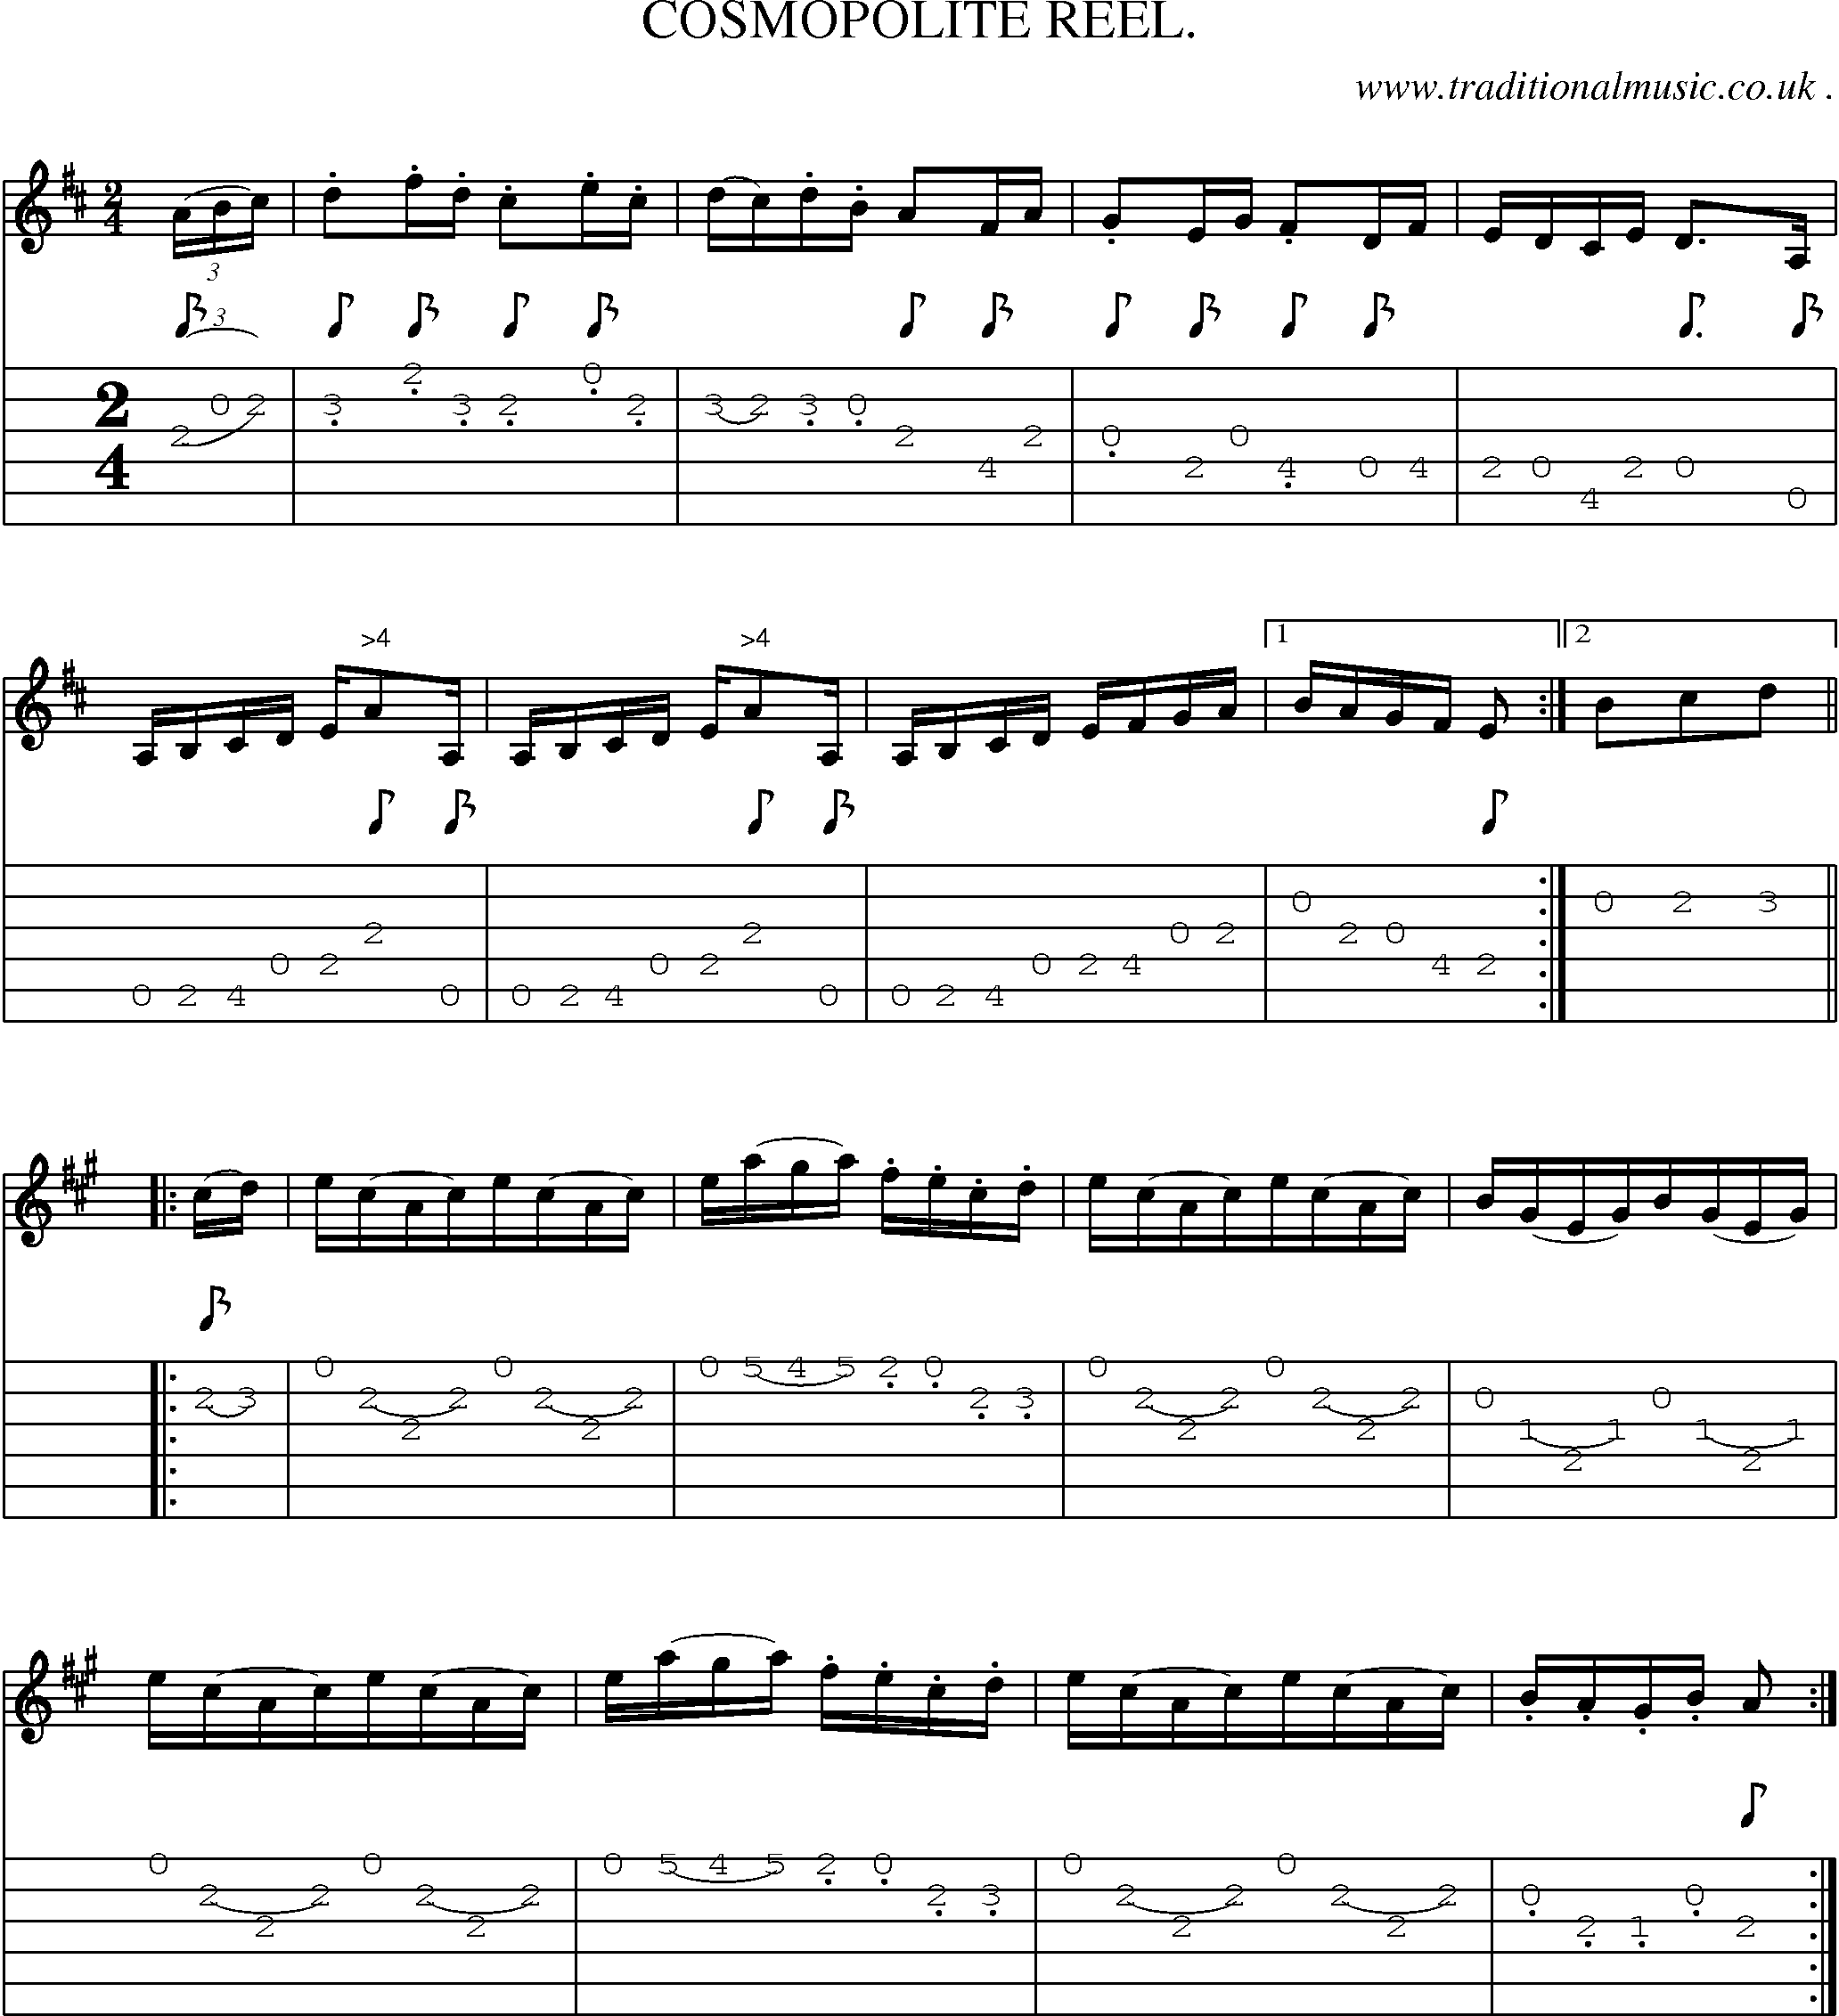 Sheet-Music and Guitar Tabs for Cosmopolite Reel